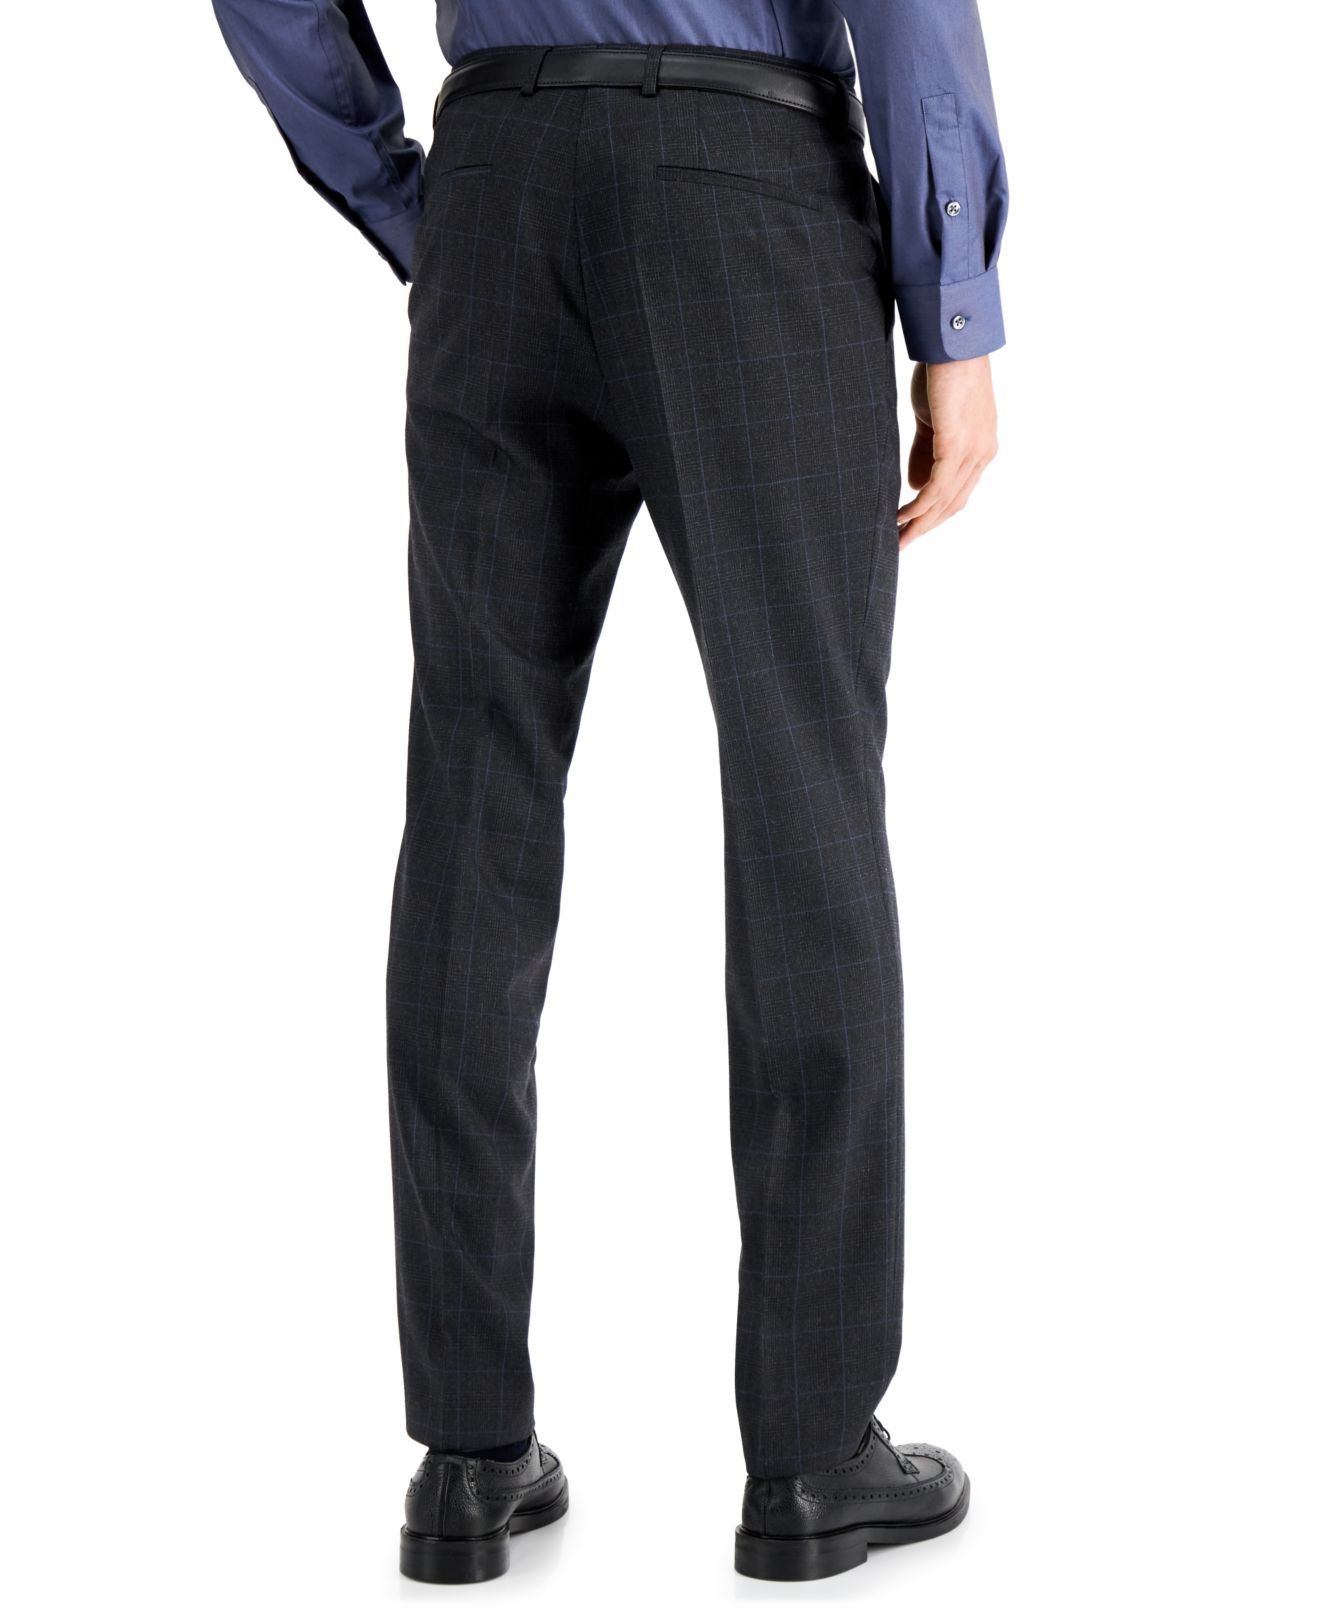 Color: Grays Size Type: Regular Bottoms Size (Men's): 34 Inseam: 32 Type: Pants Style: Dress Pants Occasion: Formal Material: 100% Wool Stretch: YES